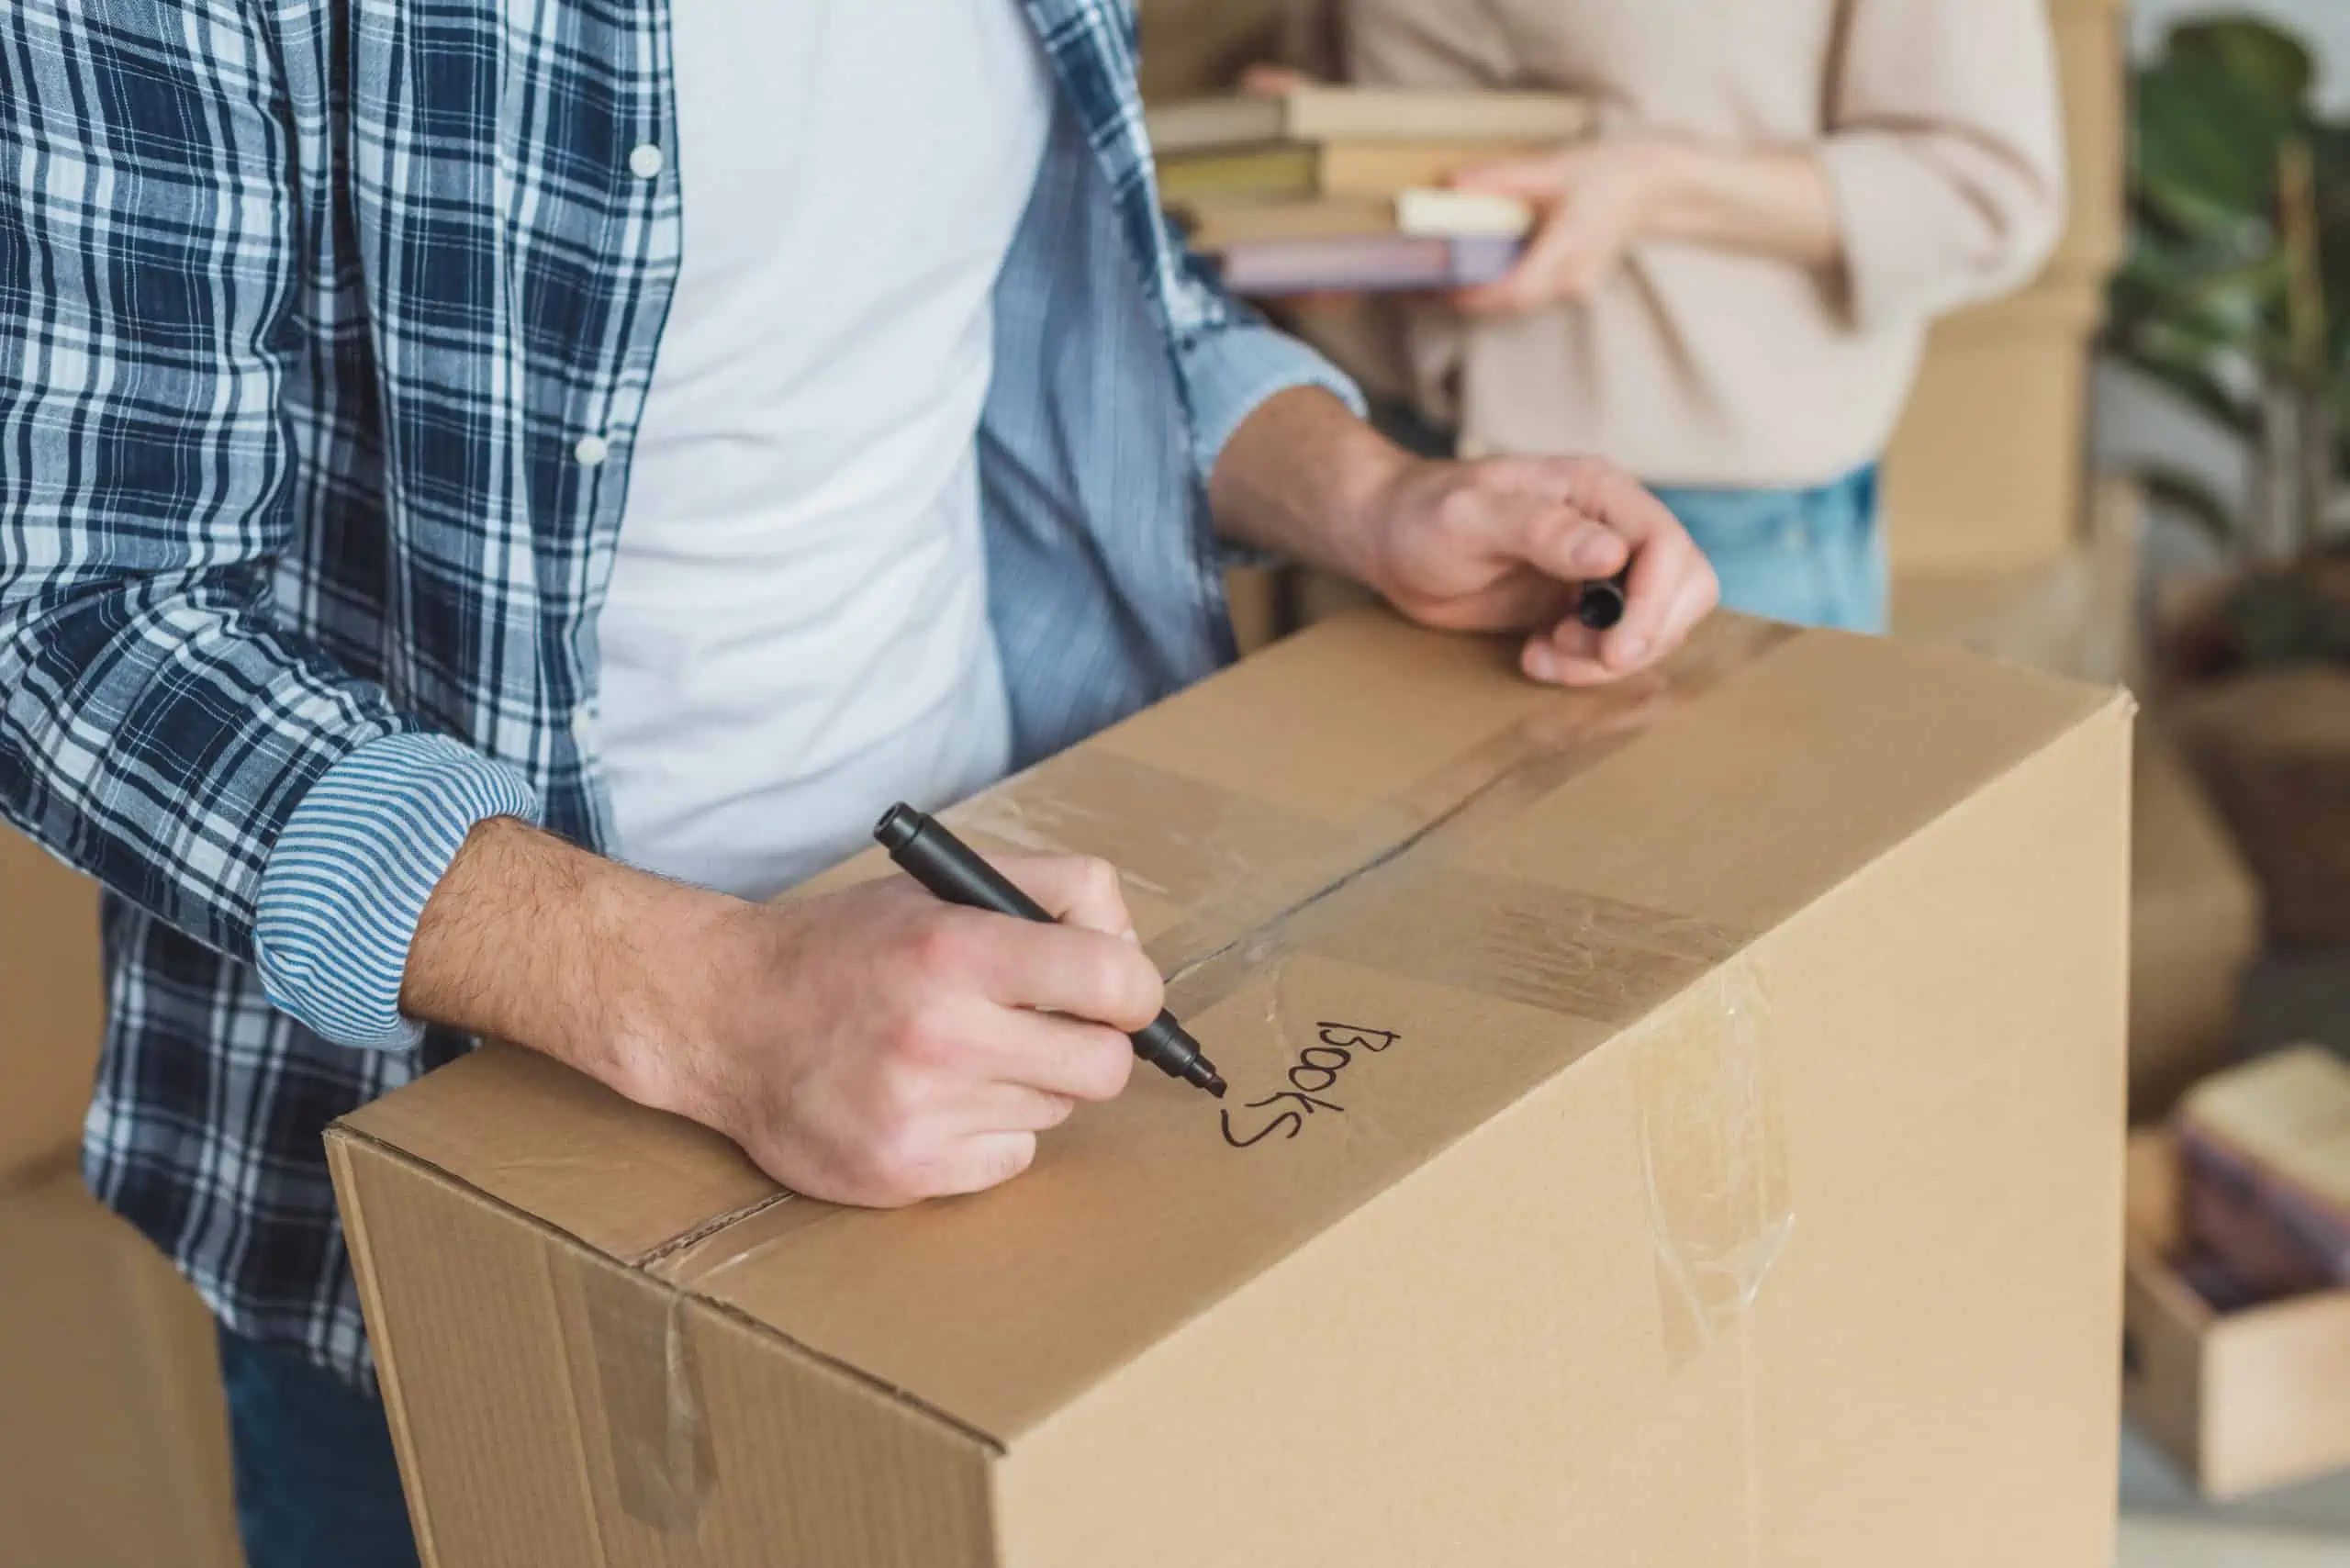 Man renting a home packing a moving box writing "books" in black marker